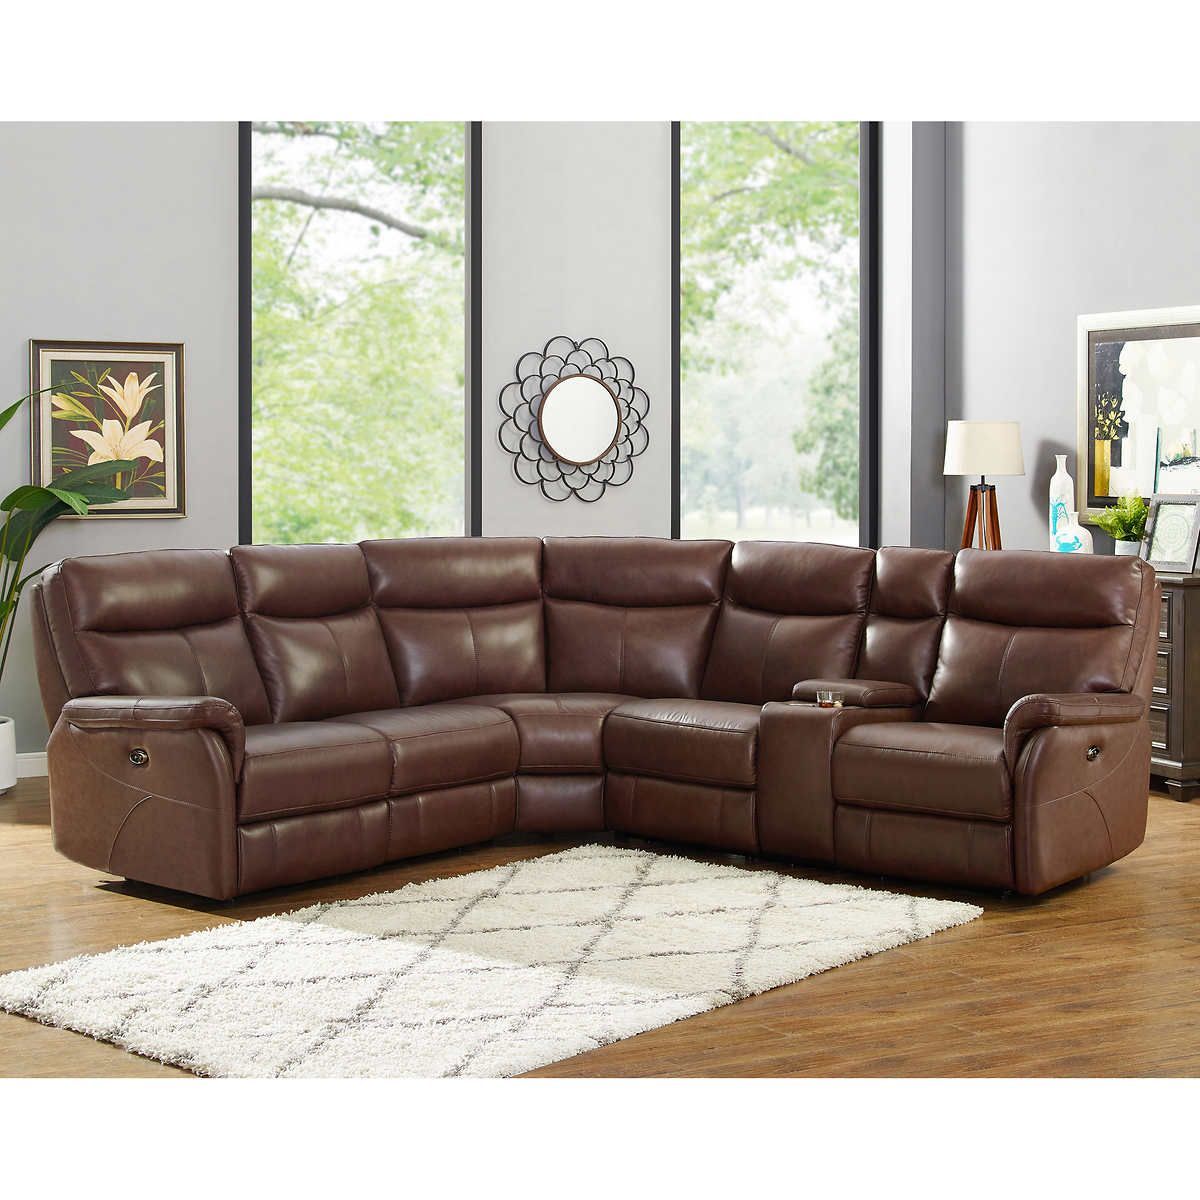 Bridgepark Top Grain Leather Power Reclining Sectional | Reclining With Regard To Faux Leather Ac And Usb Charging Ottomans (View 15 of 20)